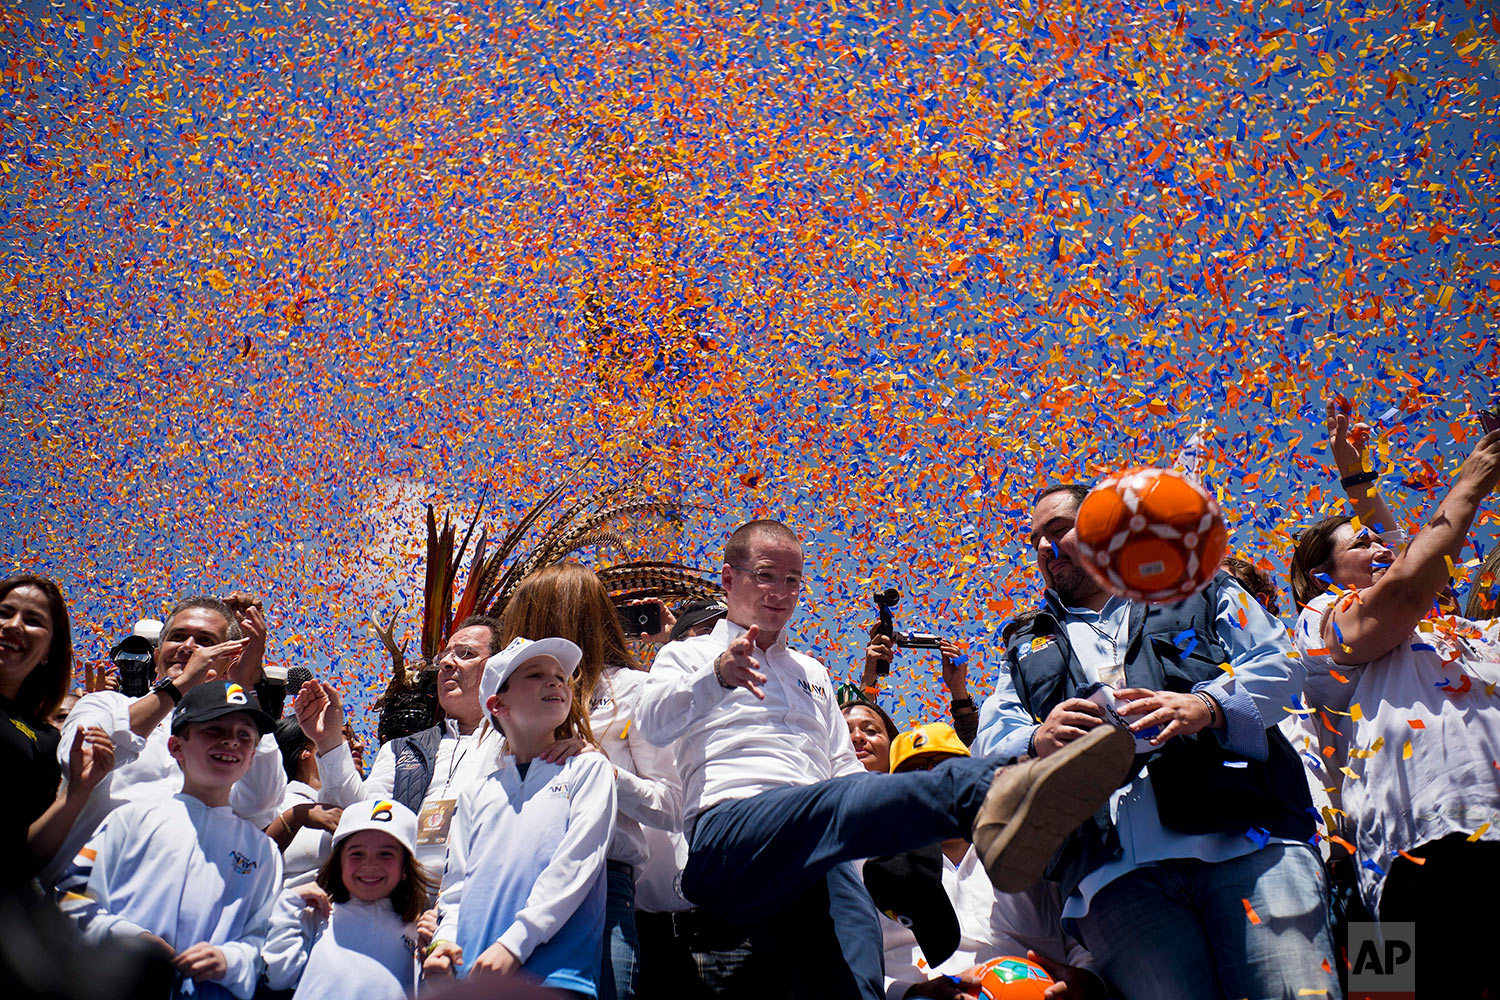  Presidential candidate Ricardo Anaya kicks a soccer ball to supporters during his campaign rally in Mexico City, June 24, 2018. (AP Photo/Ramon Espinosa) 